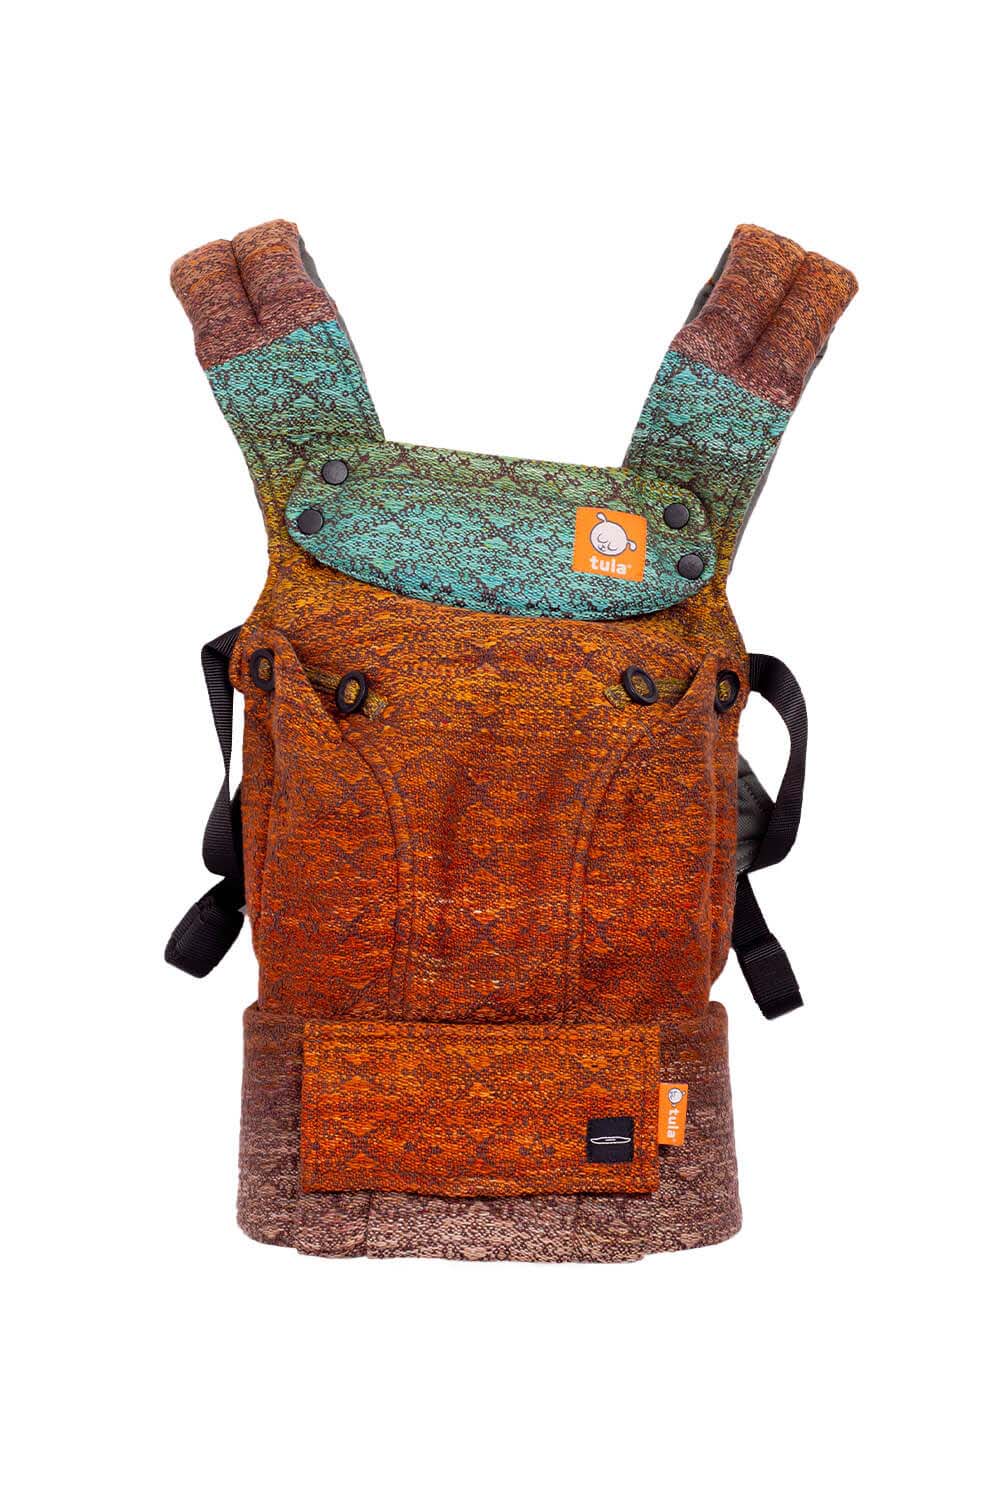 Canyon - Signature Handwoven Explore Baby Carrier